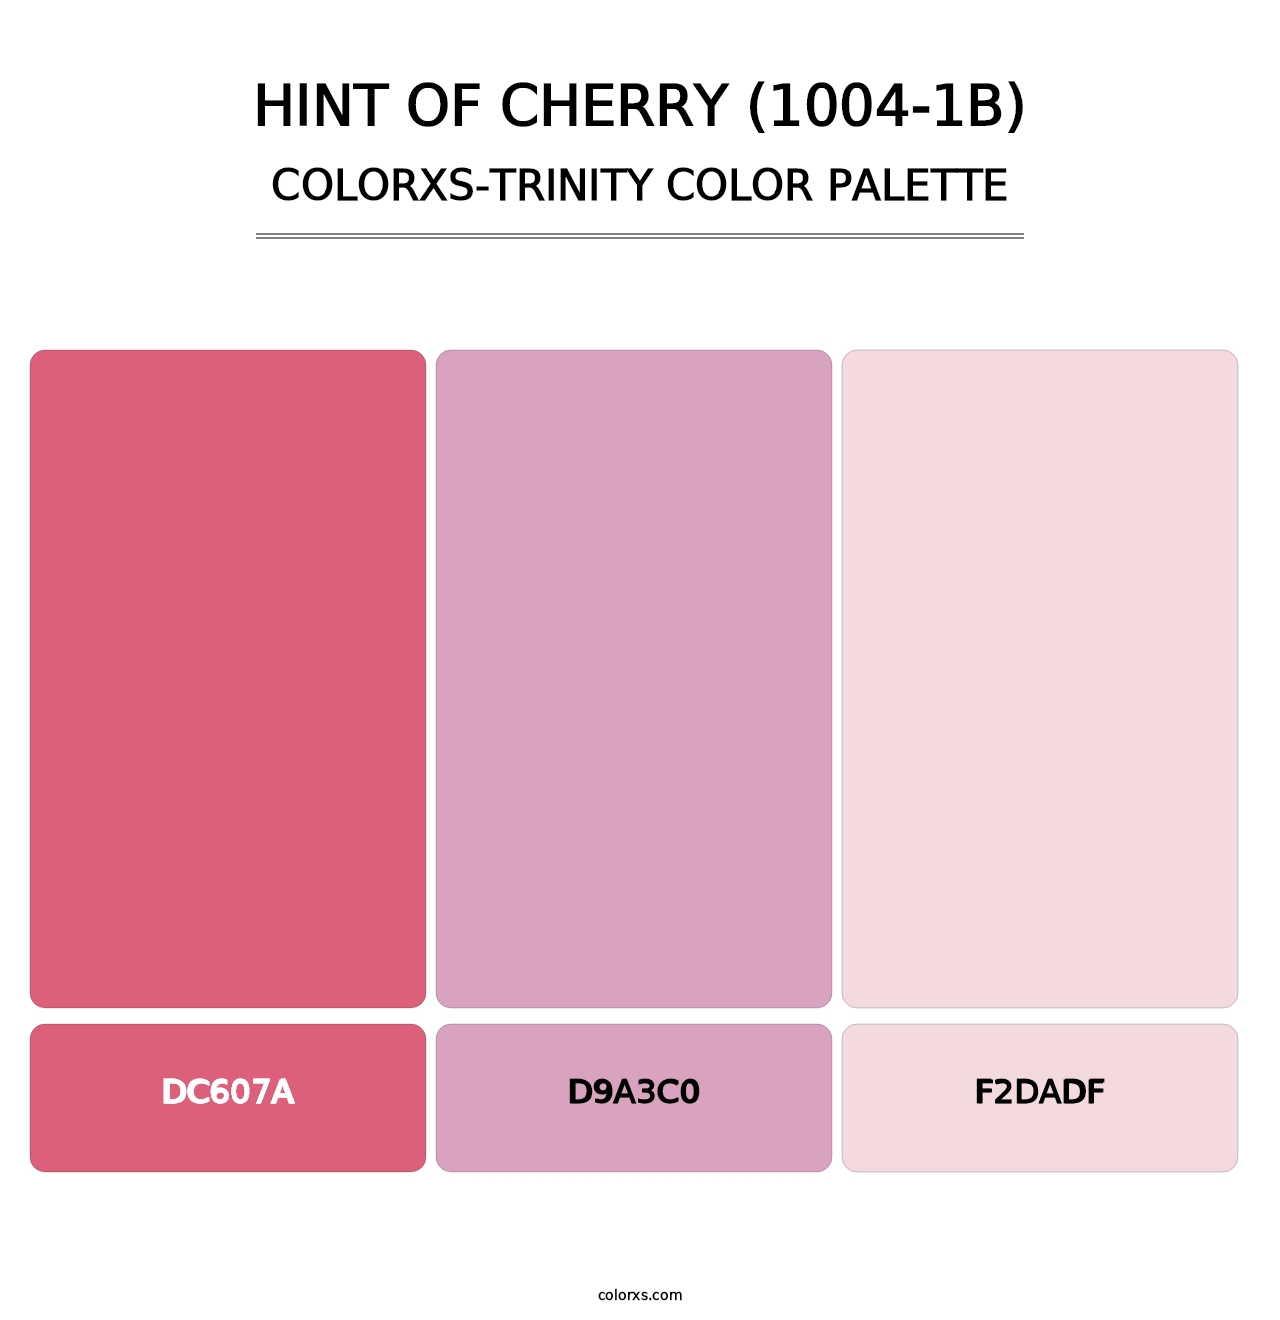 Hint of Cherry (1004-1B) - Colorxs Trinity Palette